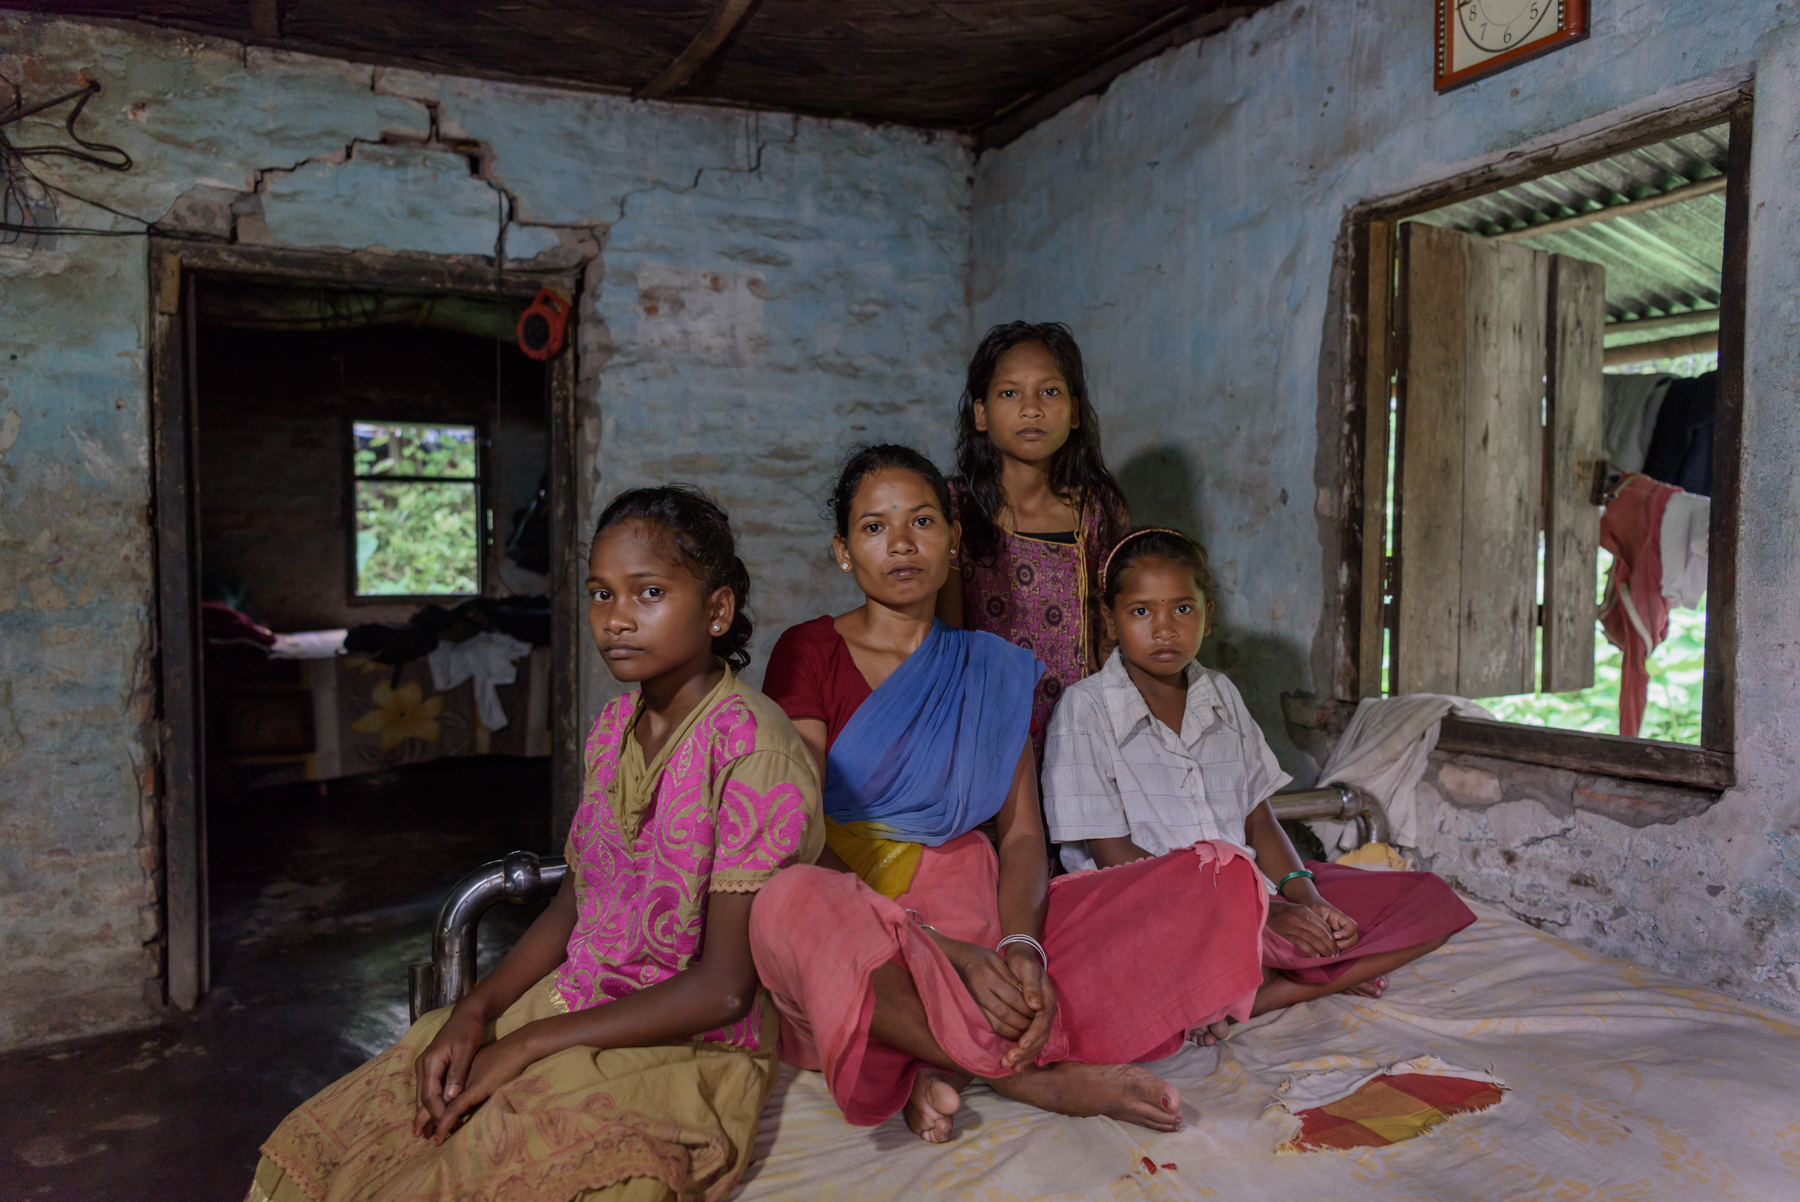  Champa Soren, 35, with her daughters Renuka, 15, Sonika, 16 and Roshni, 10. Champa used to be severely beaten by her abusive husband. To escape that, Champa fell into the hands of a trafficker who promised her a job and took her to Delhi and sold he